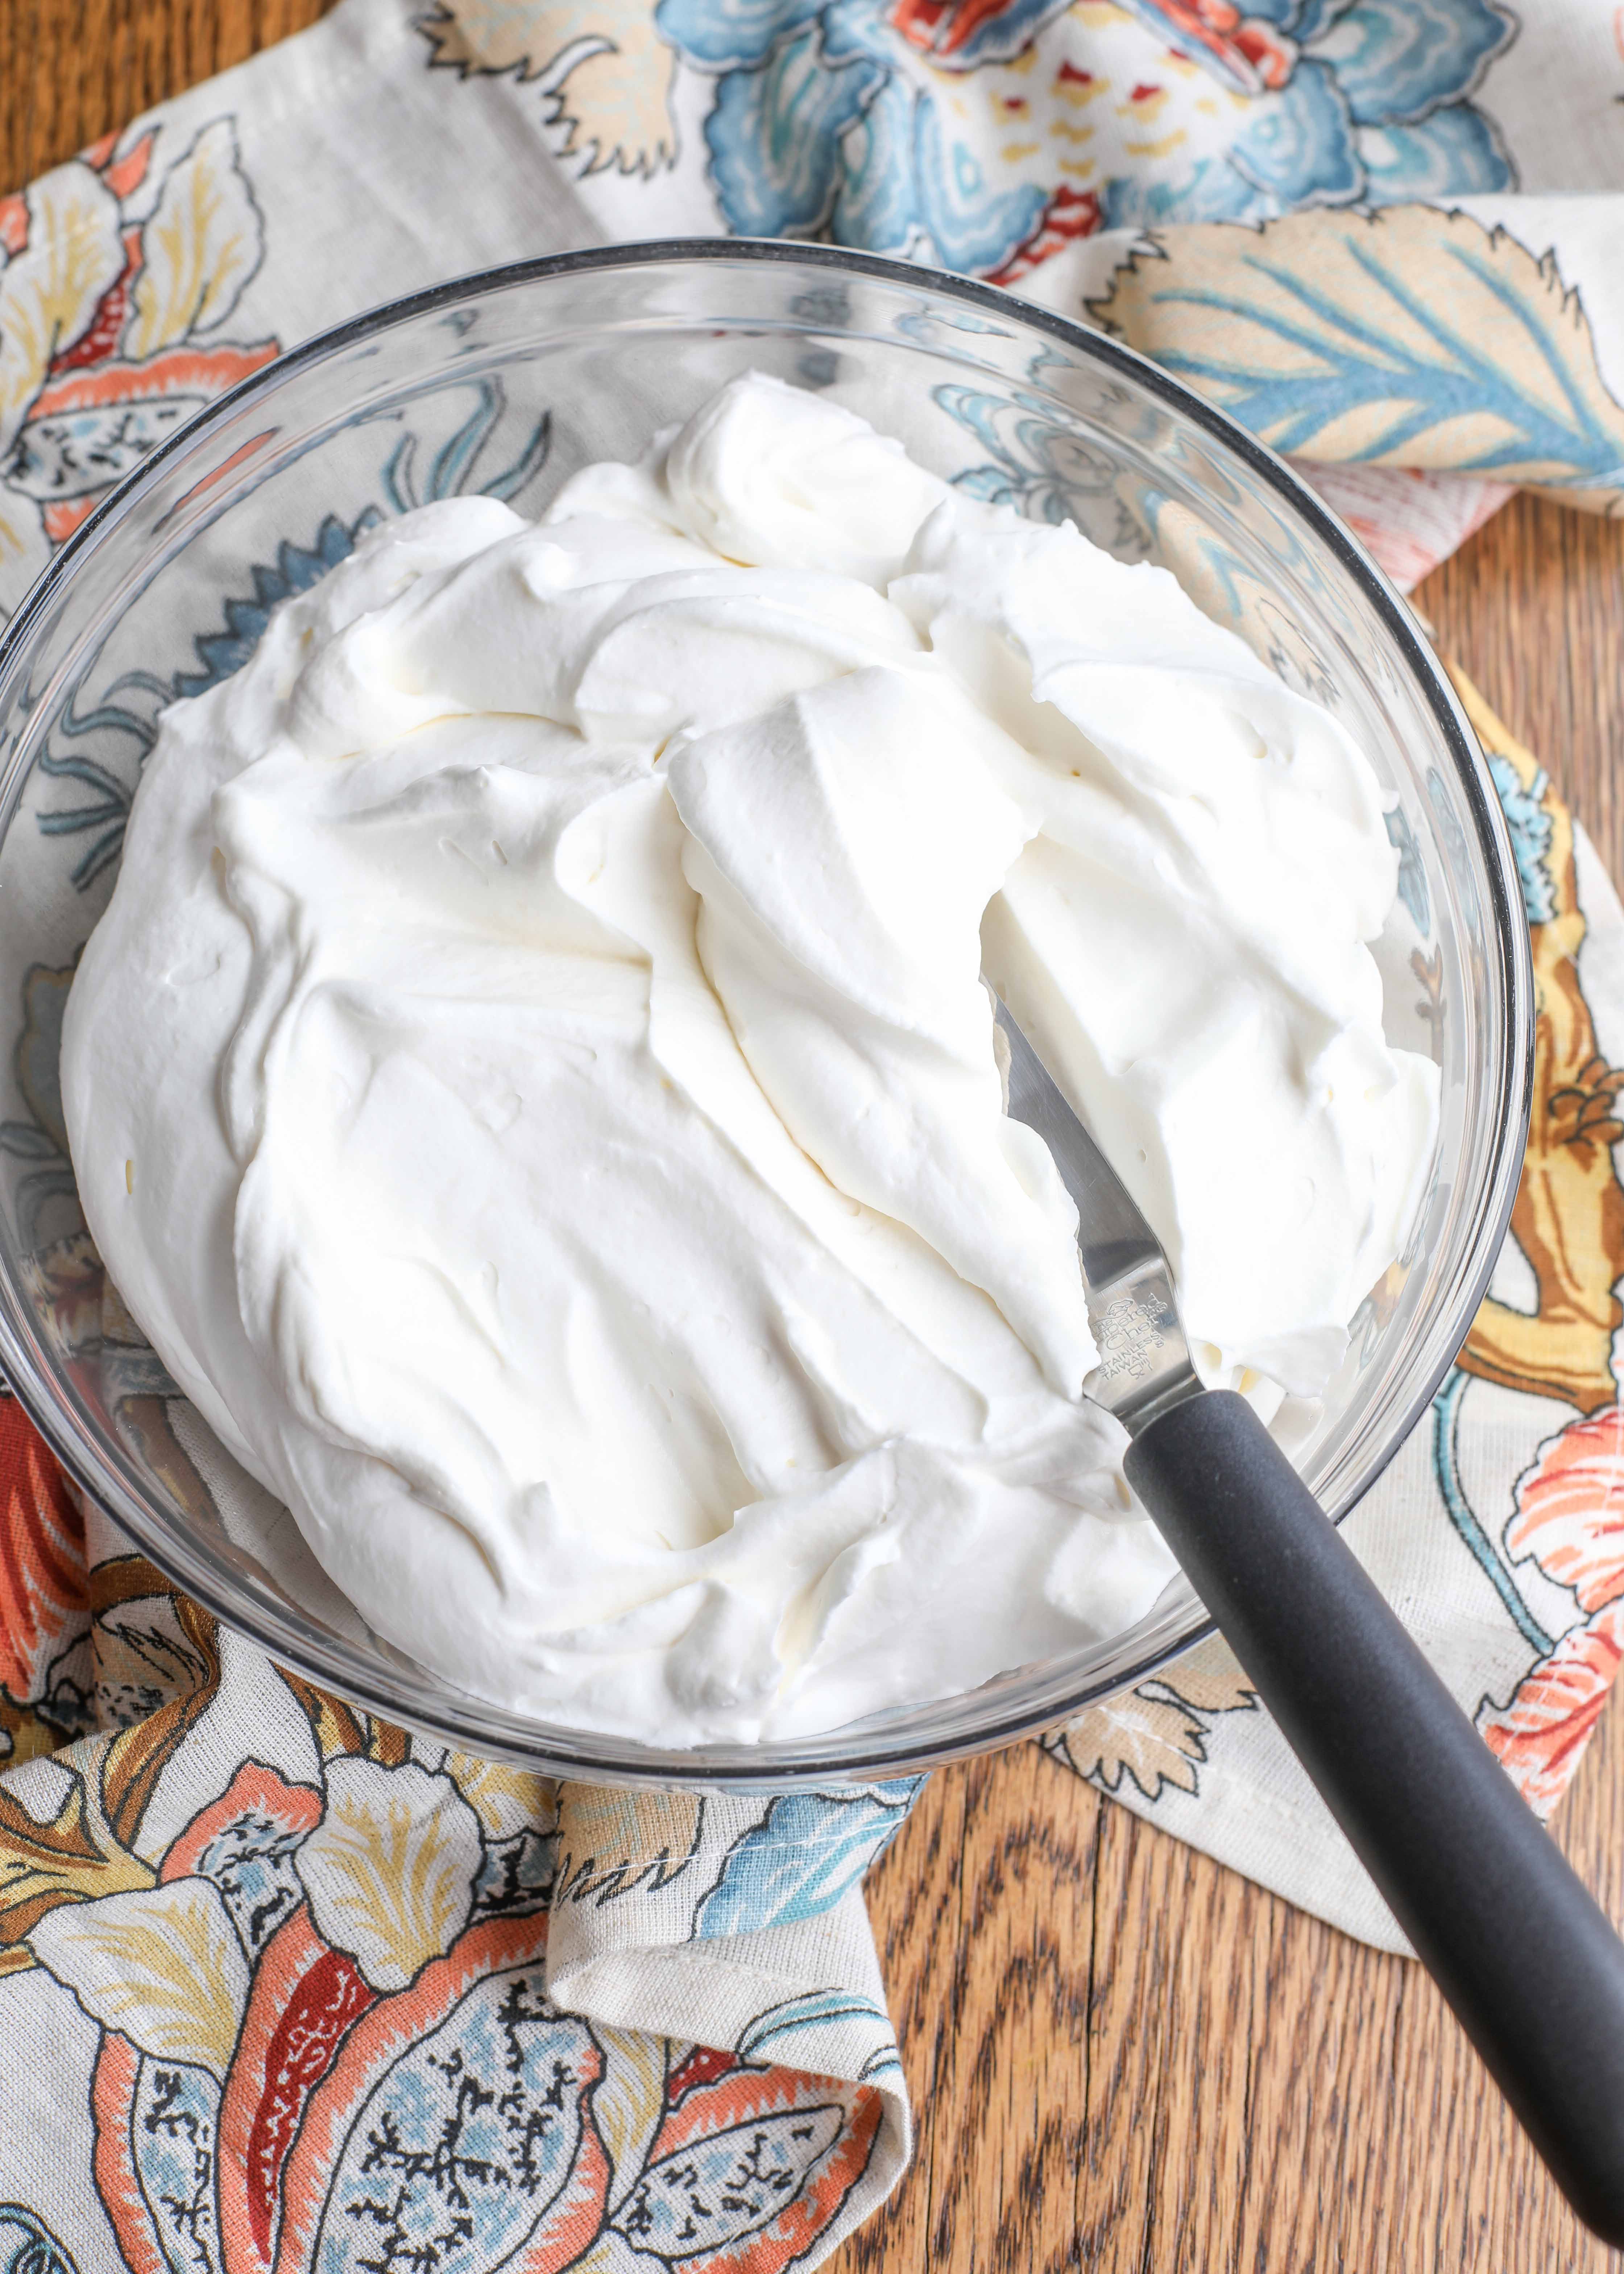 The Best Way to Make Whipped Cream